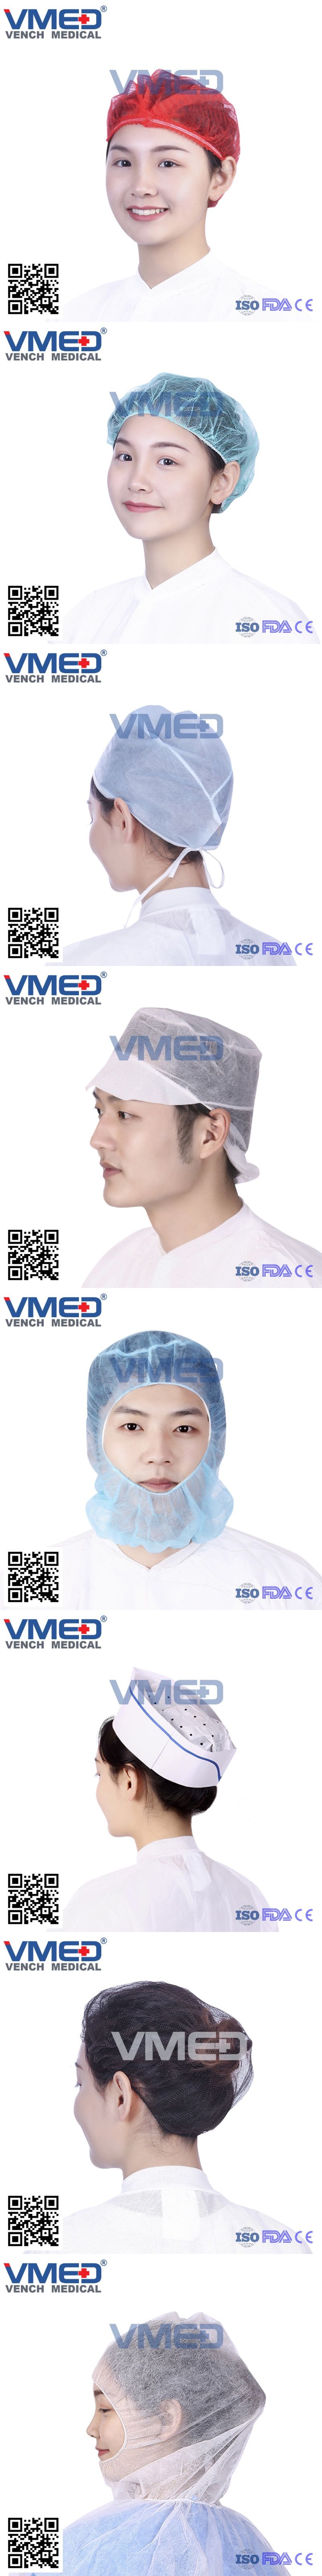 Non-Woven Surgical Cap with Easy Tie/Elastic Band,Disposable Doctor/Medical/ Bouffant/ Clip/ Mob Cap with Easy Tie/Elastic Band,Snood Cap with Easy Tie,Food Cap